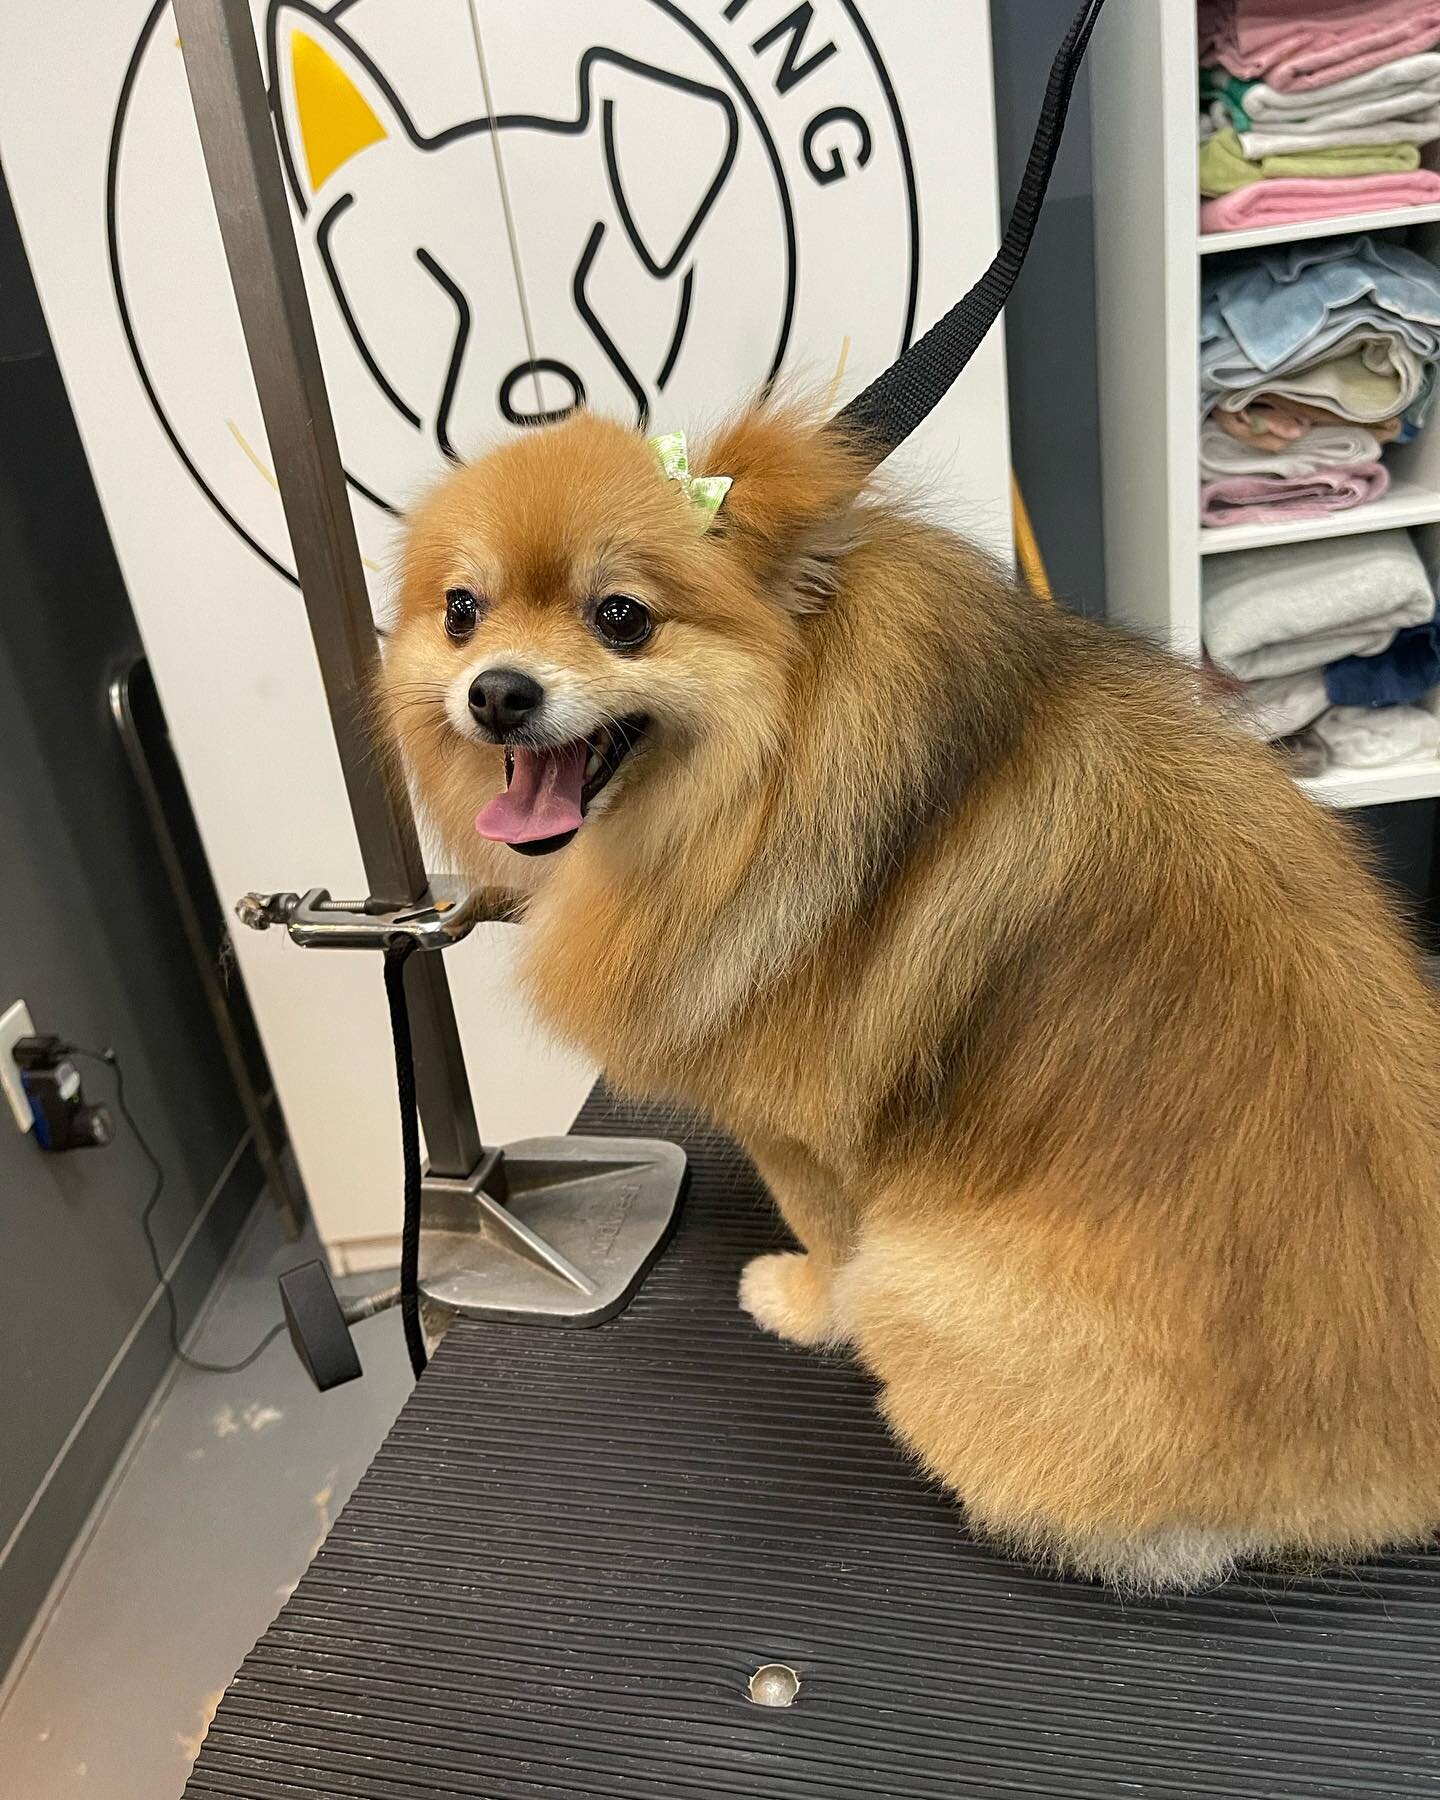 Look, it&rsquo;s a couple of freshly groomed Lepre-POMs 🍀🐶 We still have some grooming appointments available next week, give us a call at 703-931-5057 to snag one! 

#doggrooming #doggroomer #groomer #pomeranian #grooming #groomingsalon #dogspa #p